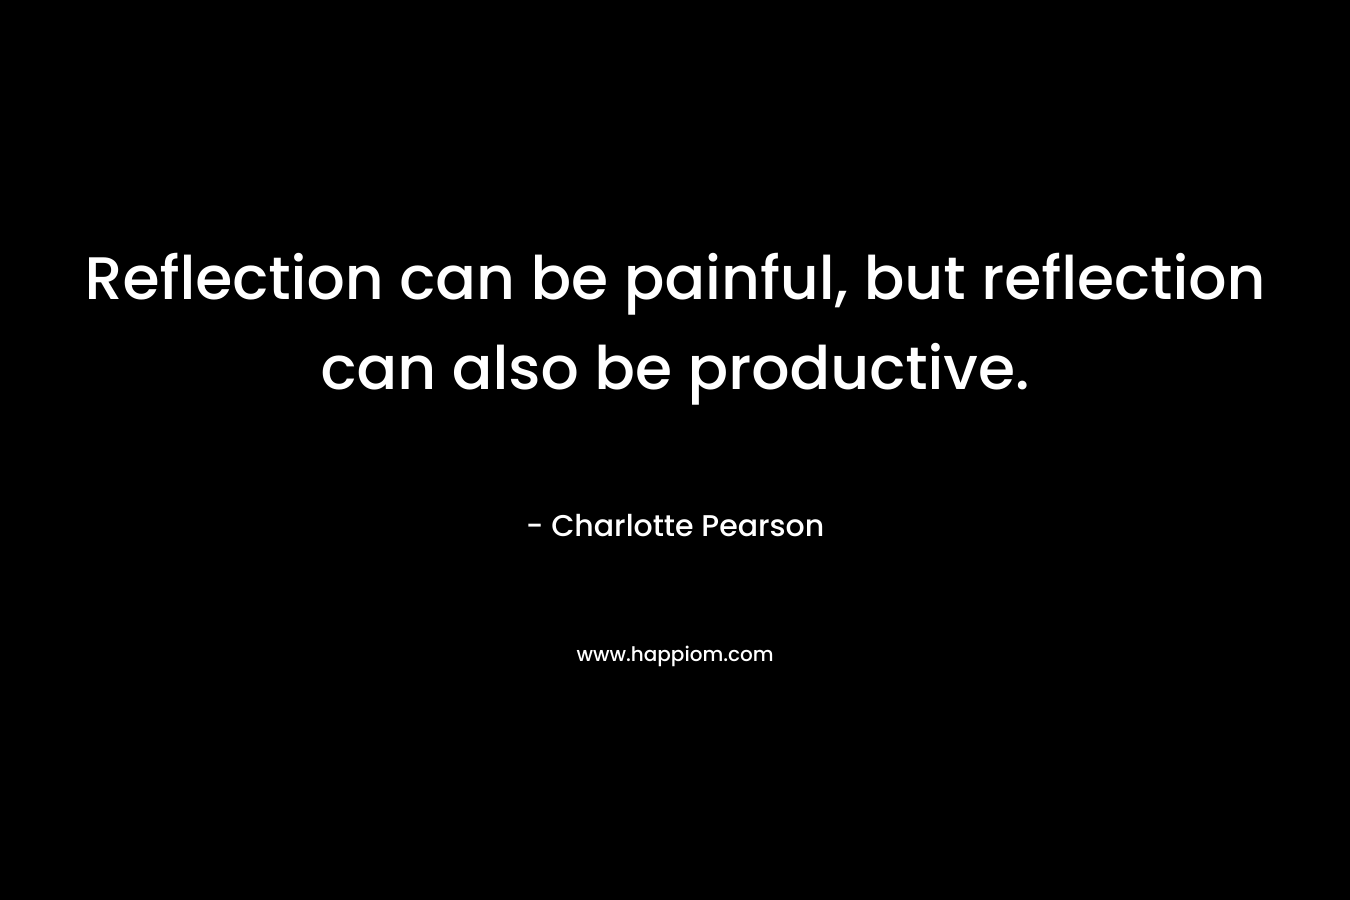 Reflection can be painful, but reflection can also be productive.